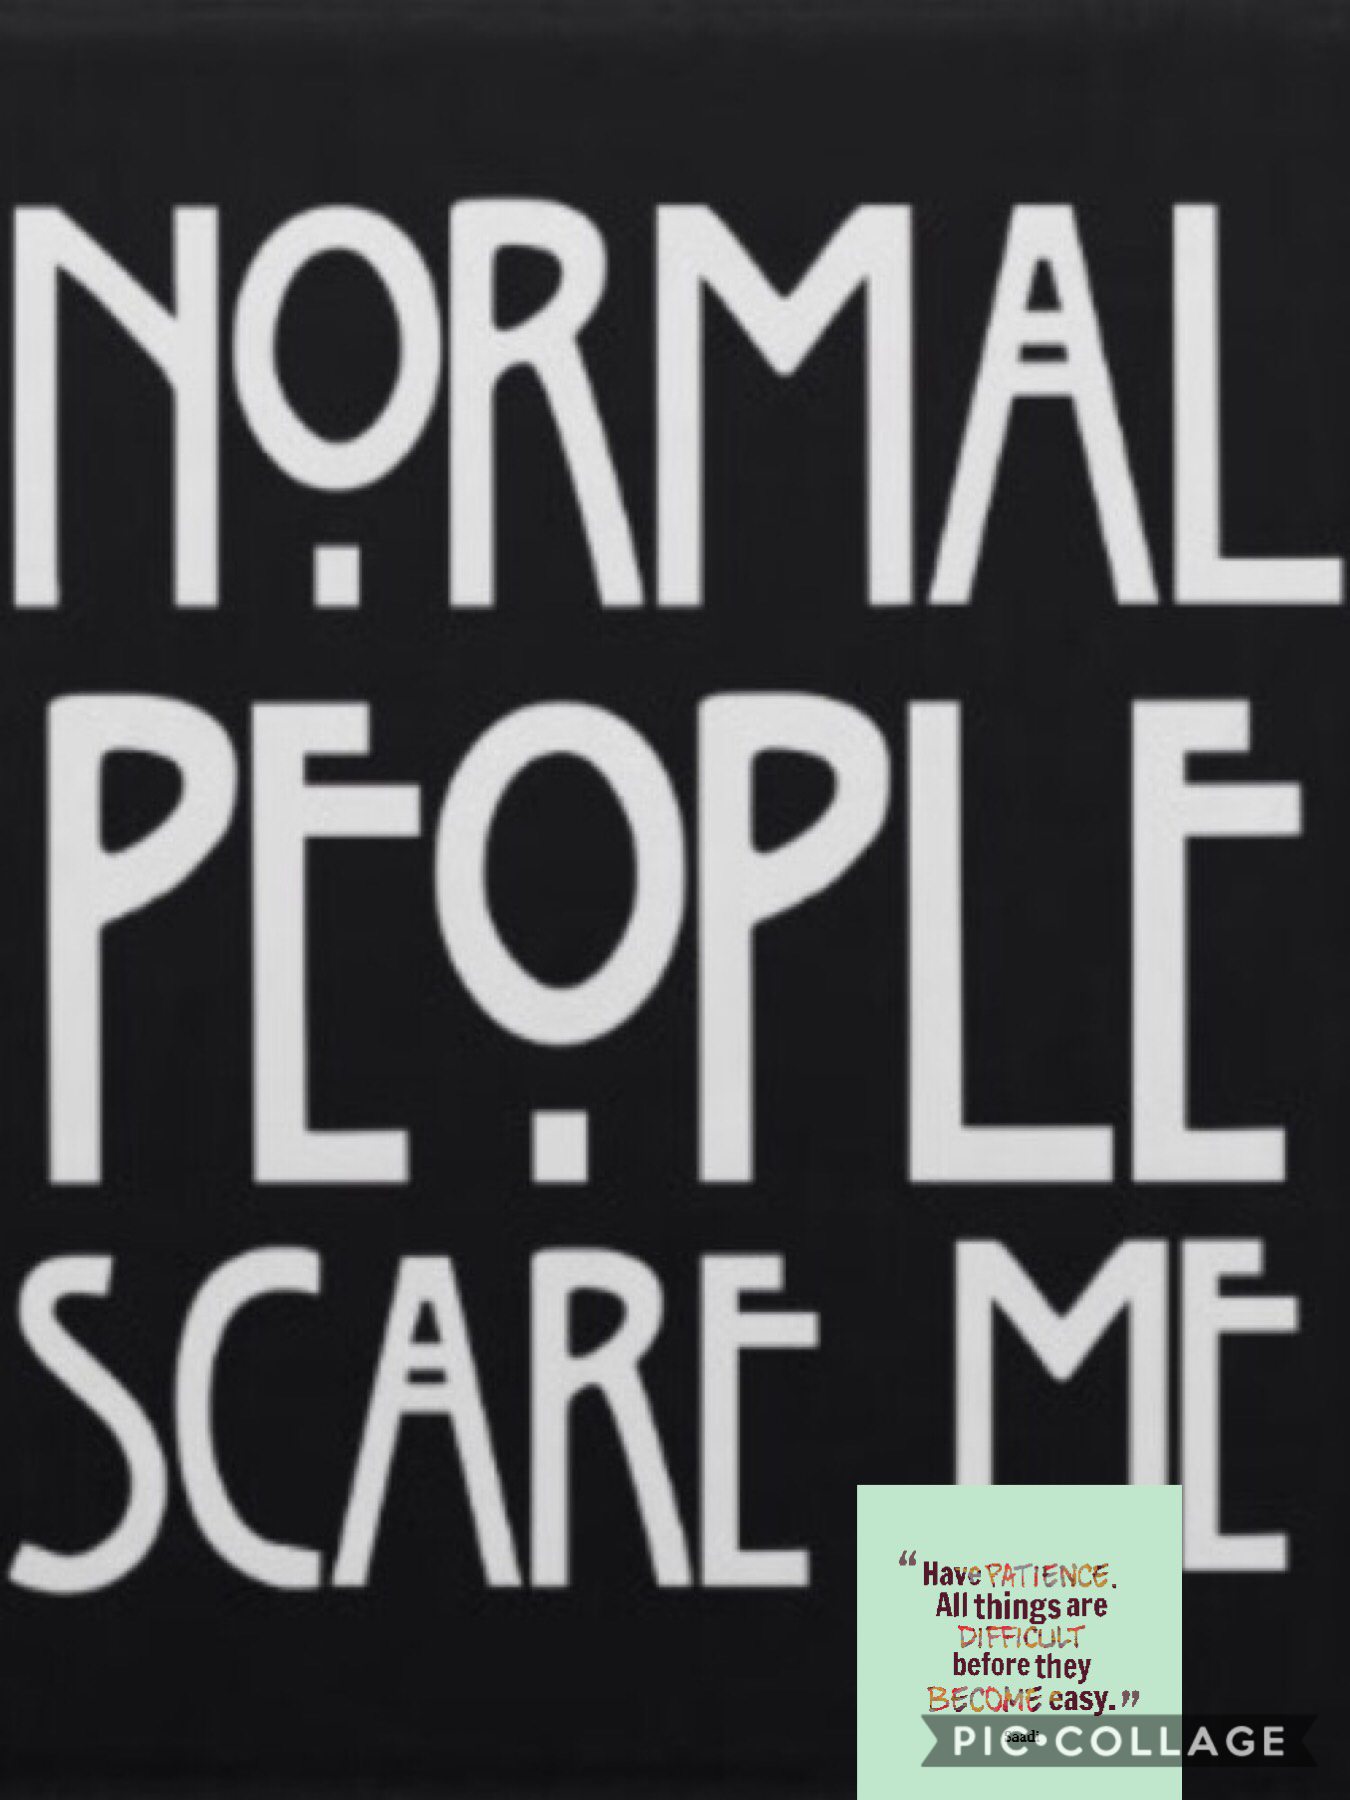 Normal people are scary